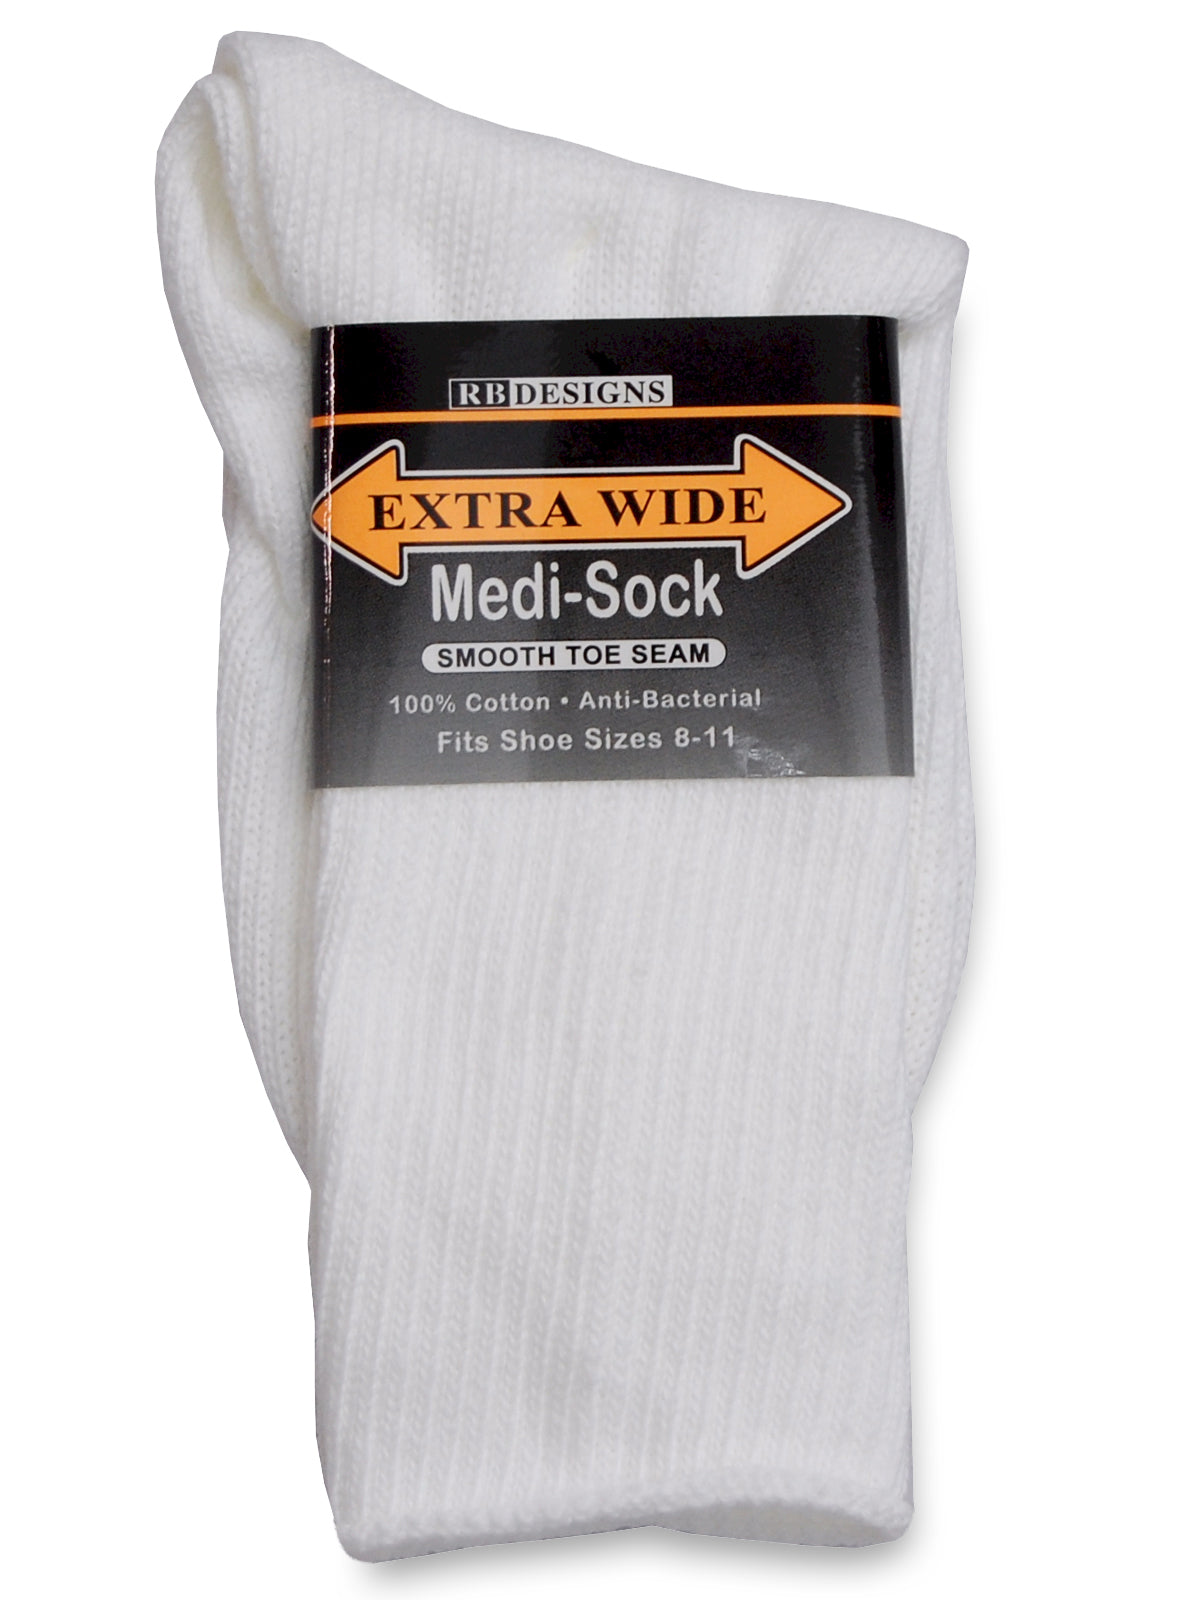 Extra Wide Medical Crew Sock in White - Size Large (12 - 16)